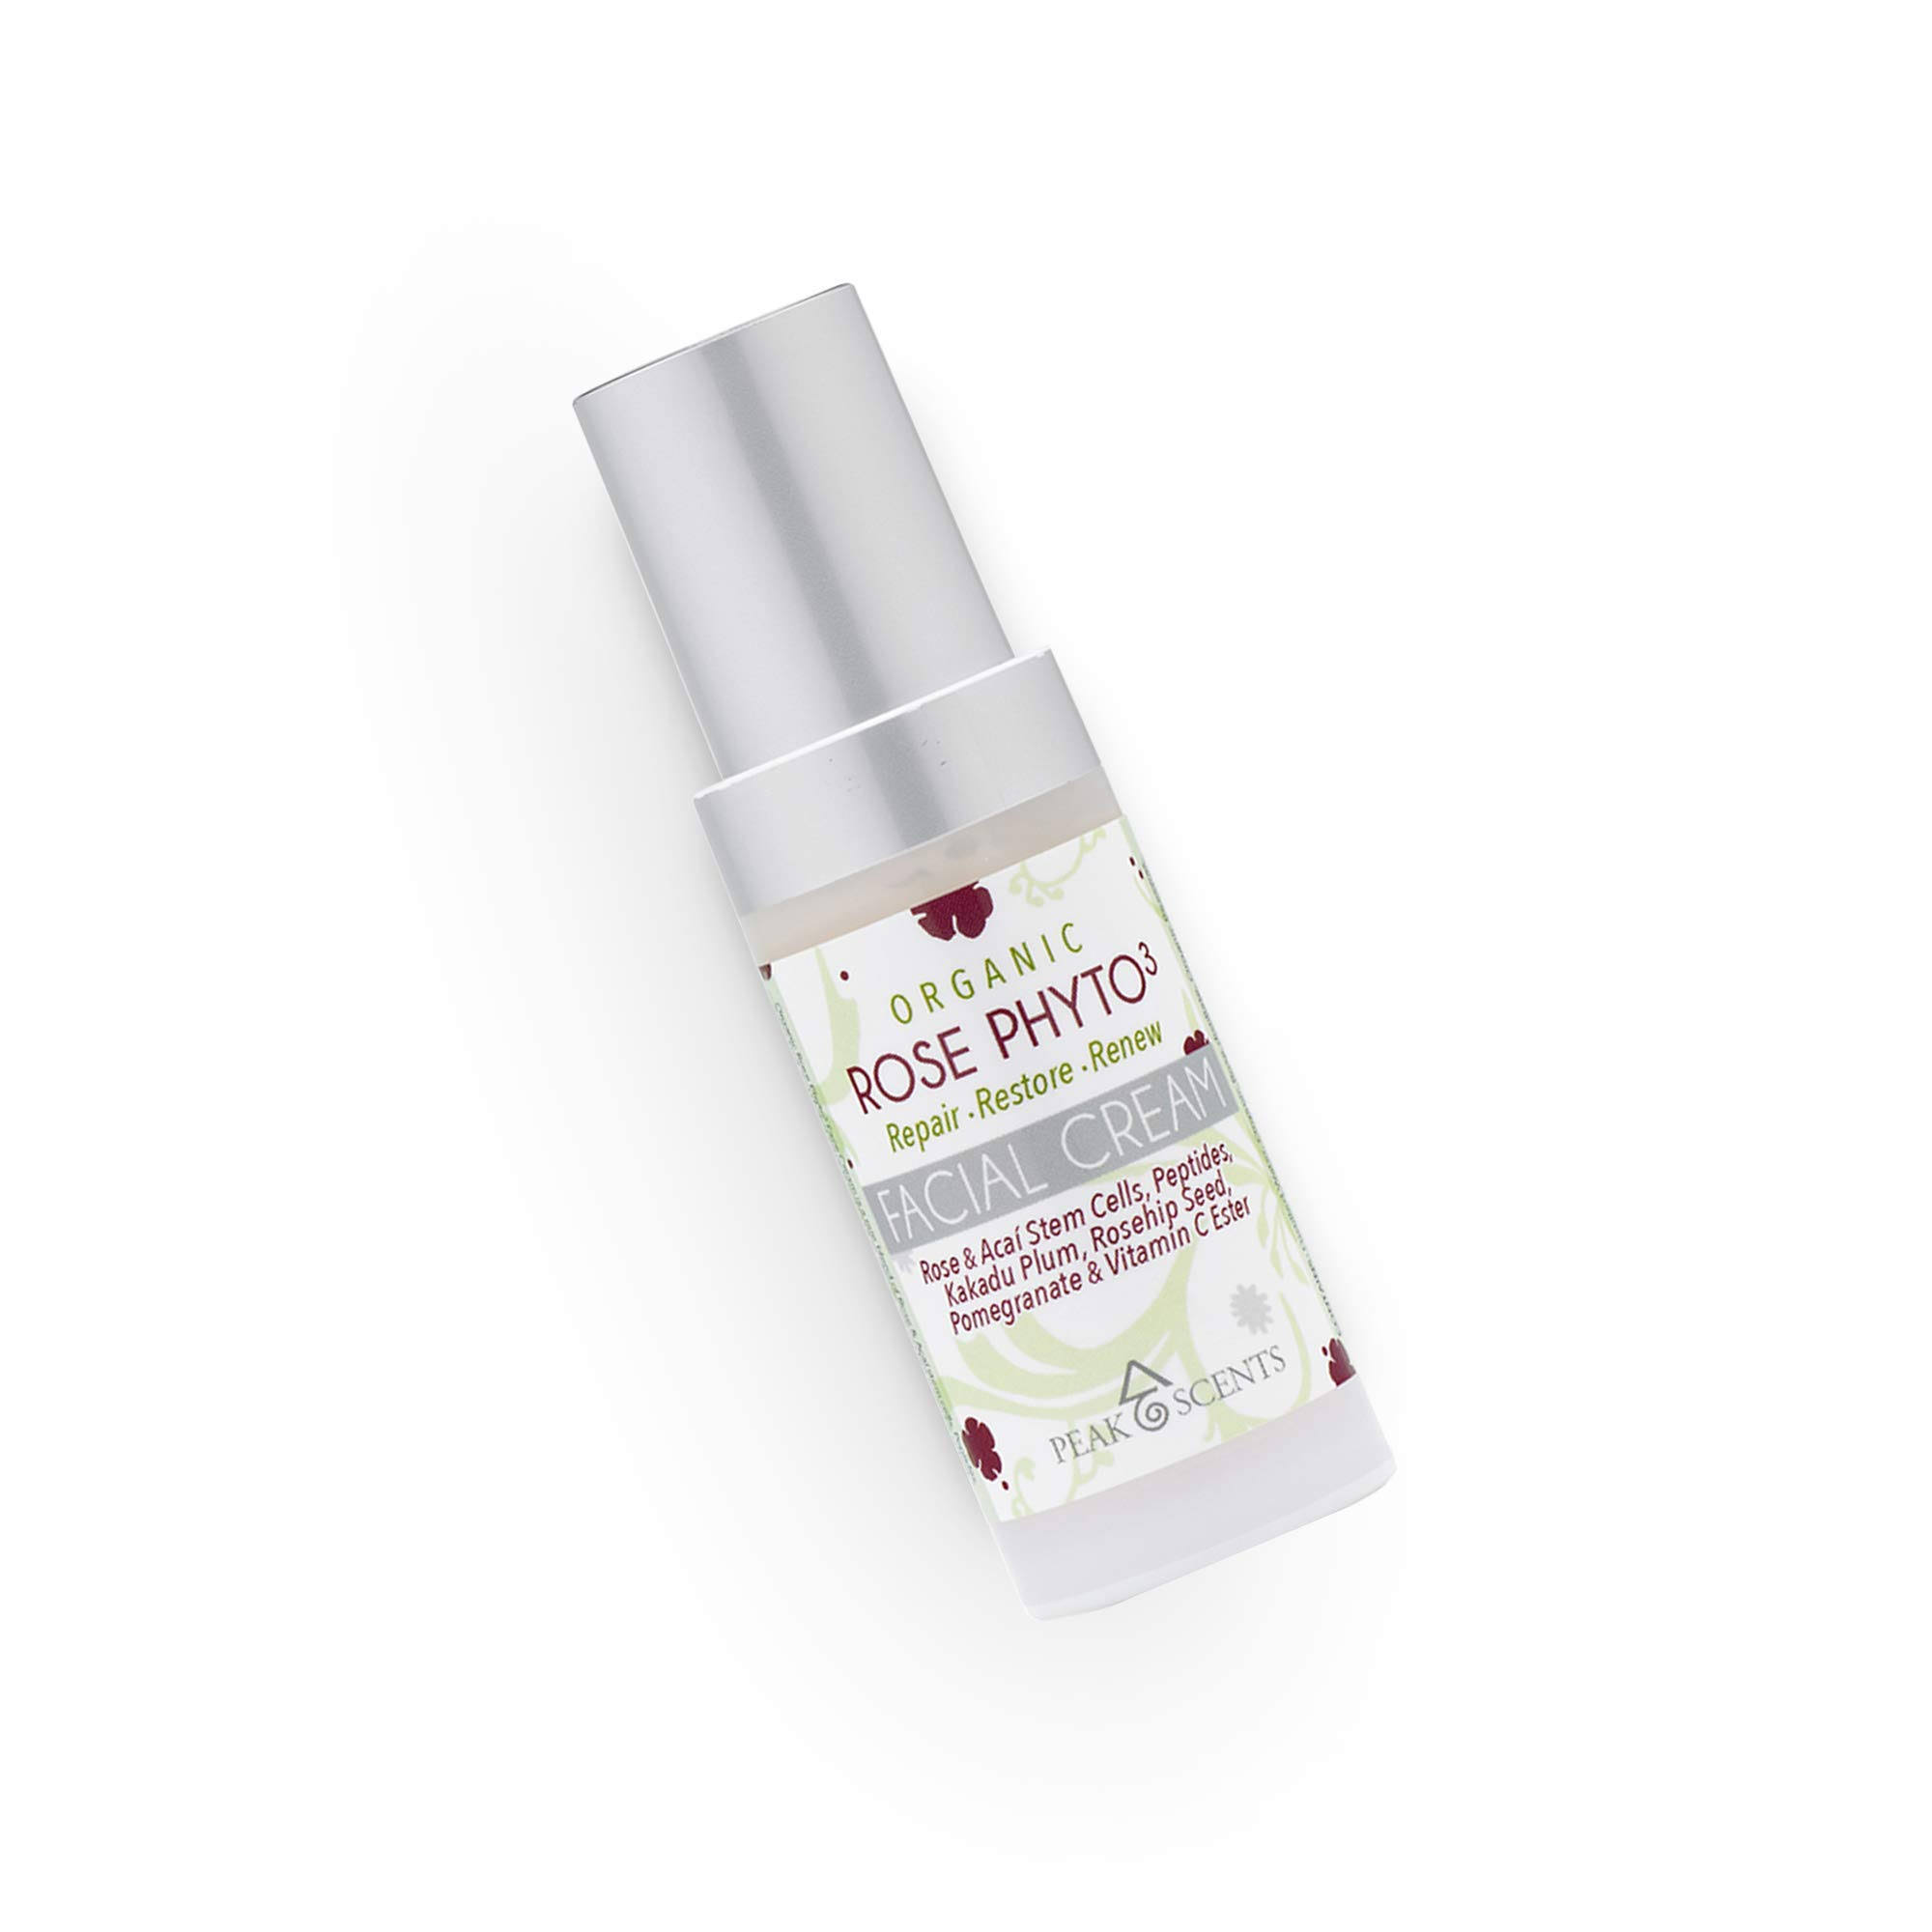 Organic Rose Phyto3 Face Cream Infused with Vitamin C and E, Rose Stem Cells and Peptides - Peak Scents